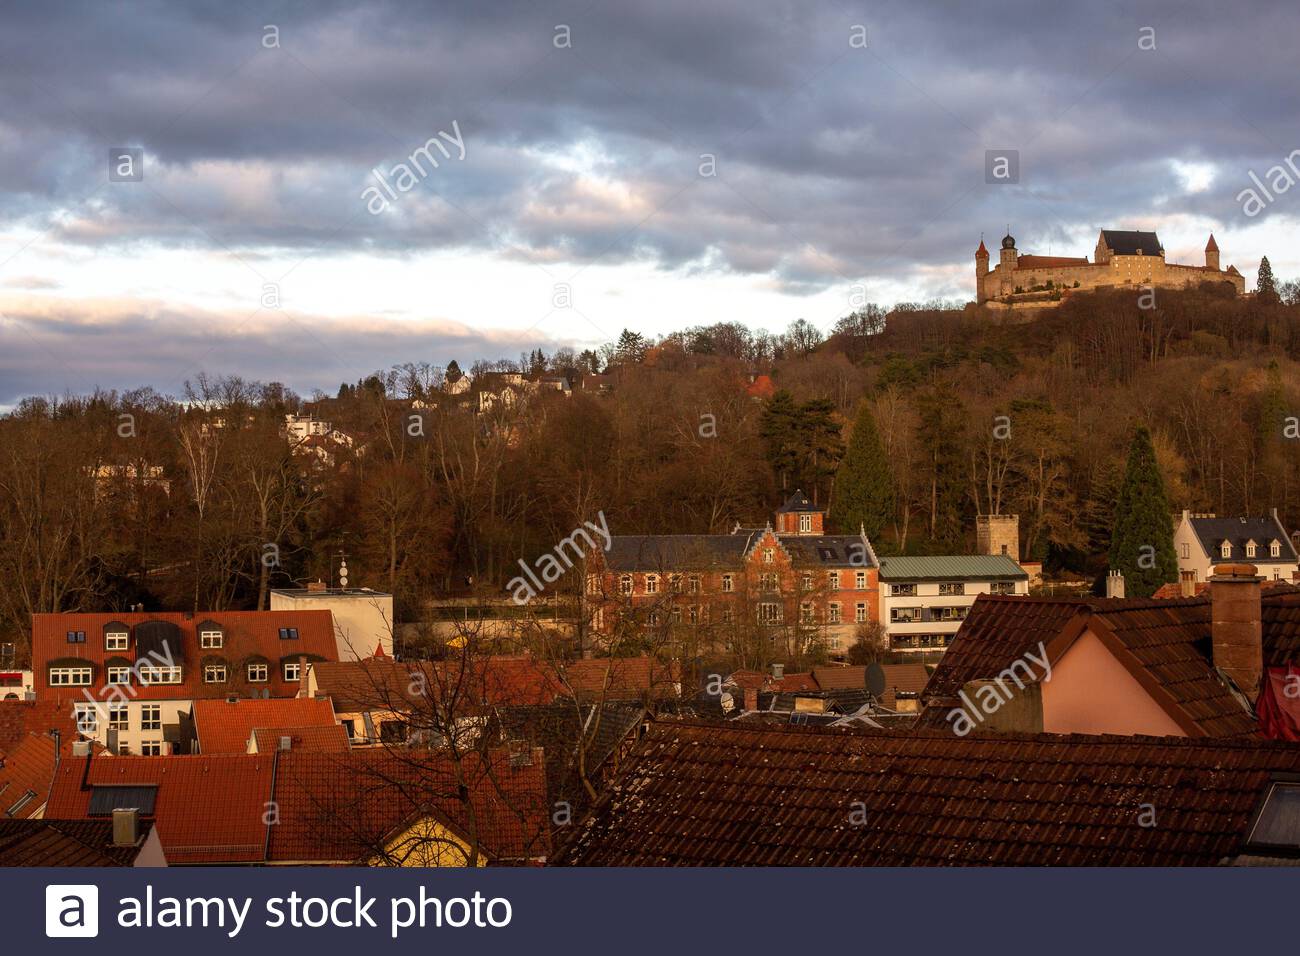 A beautiful winter sunset across the city of Coburg in Bavaria; Germany, with the castle known as Veste Coburg on a hill in the background Stock Photo